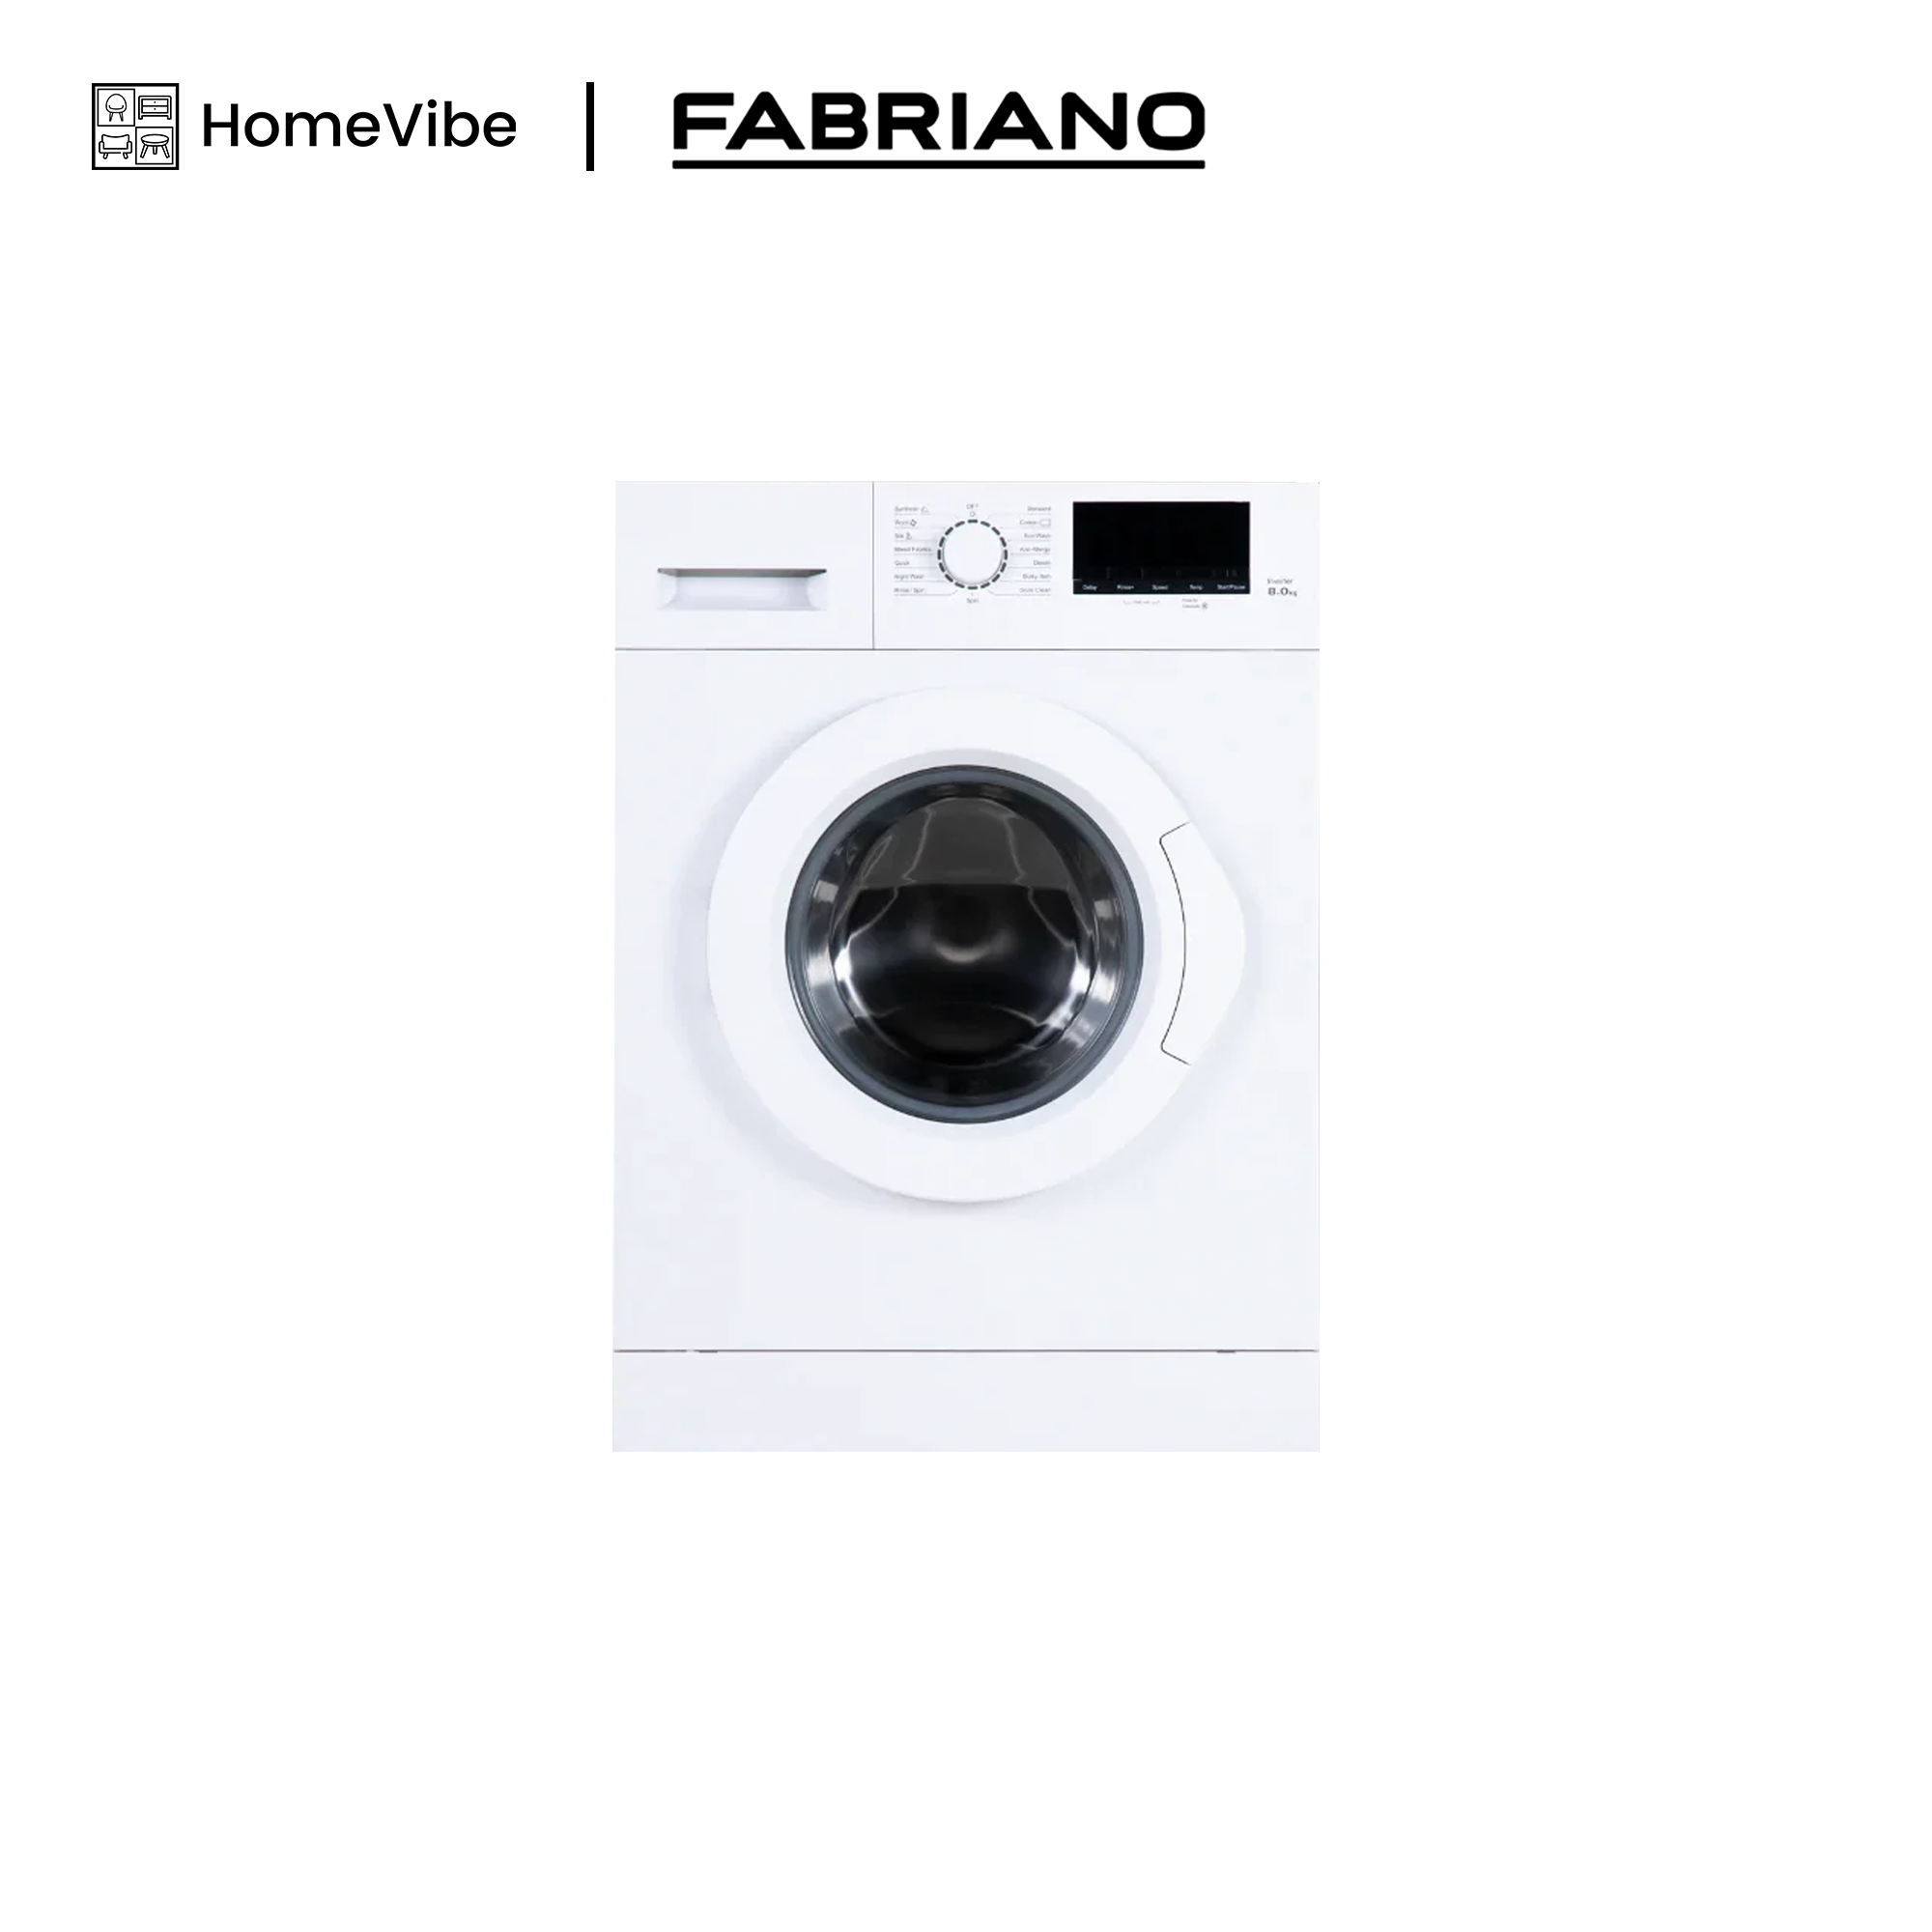 Fabriano 8kg Frontload Washer with Spin dry FWFG08WH-I